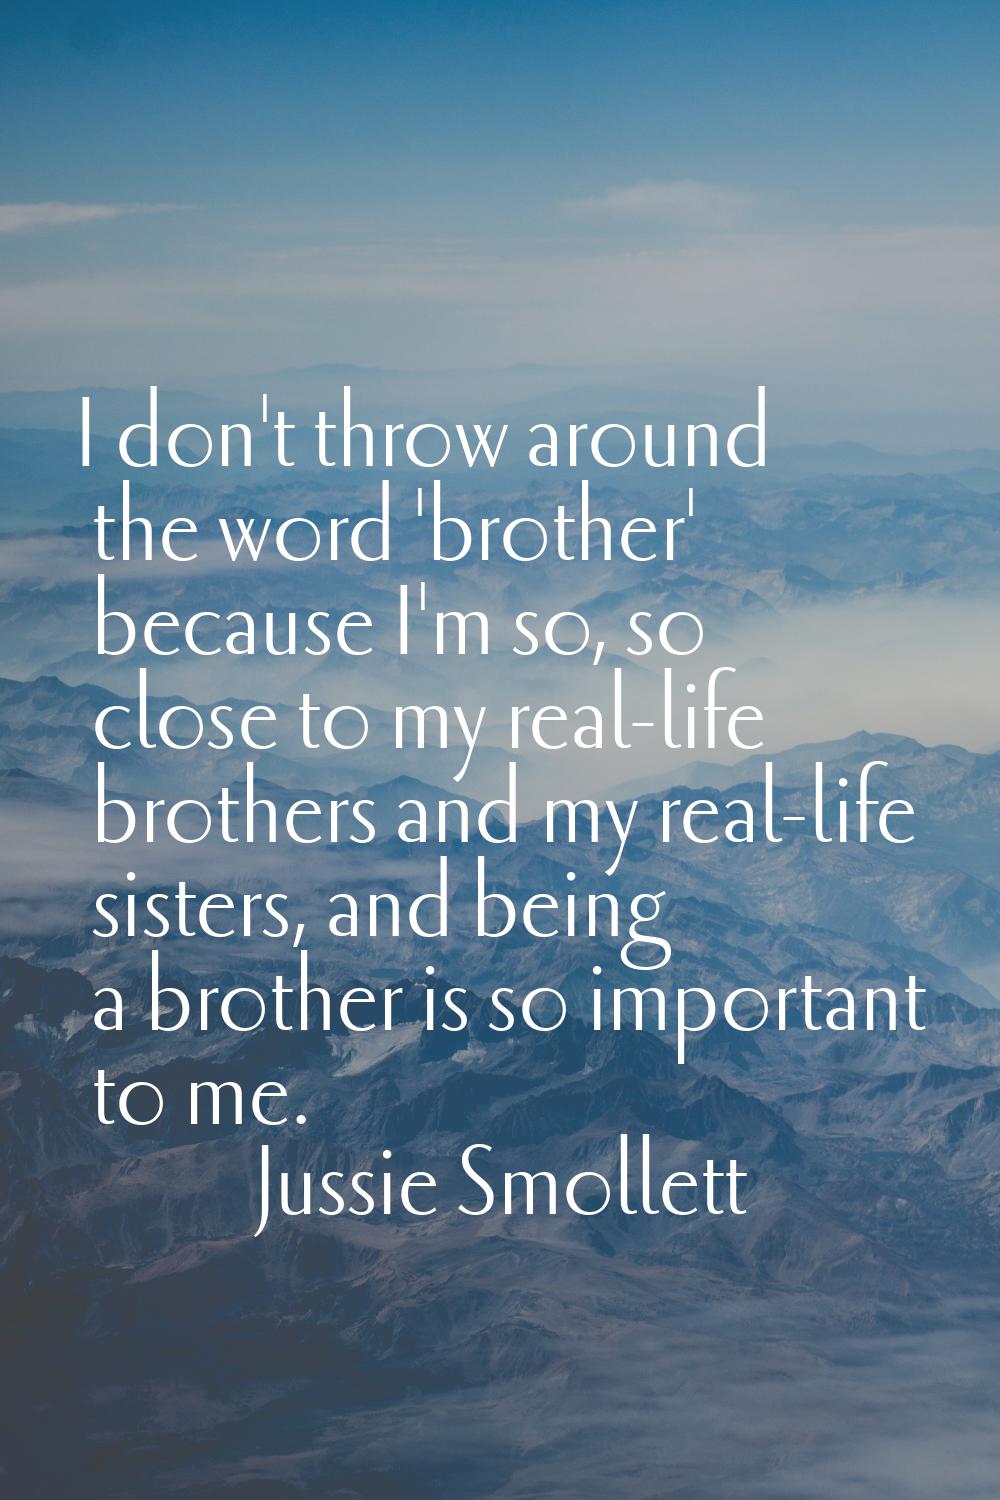 I don't throw around the word 'brother' because I'm so, so close to my real-life brothers and my re